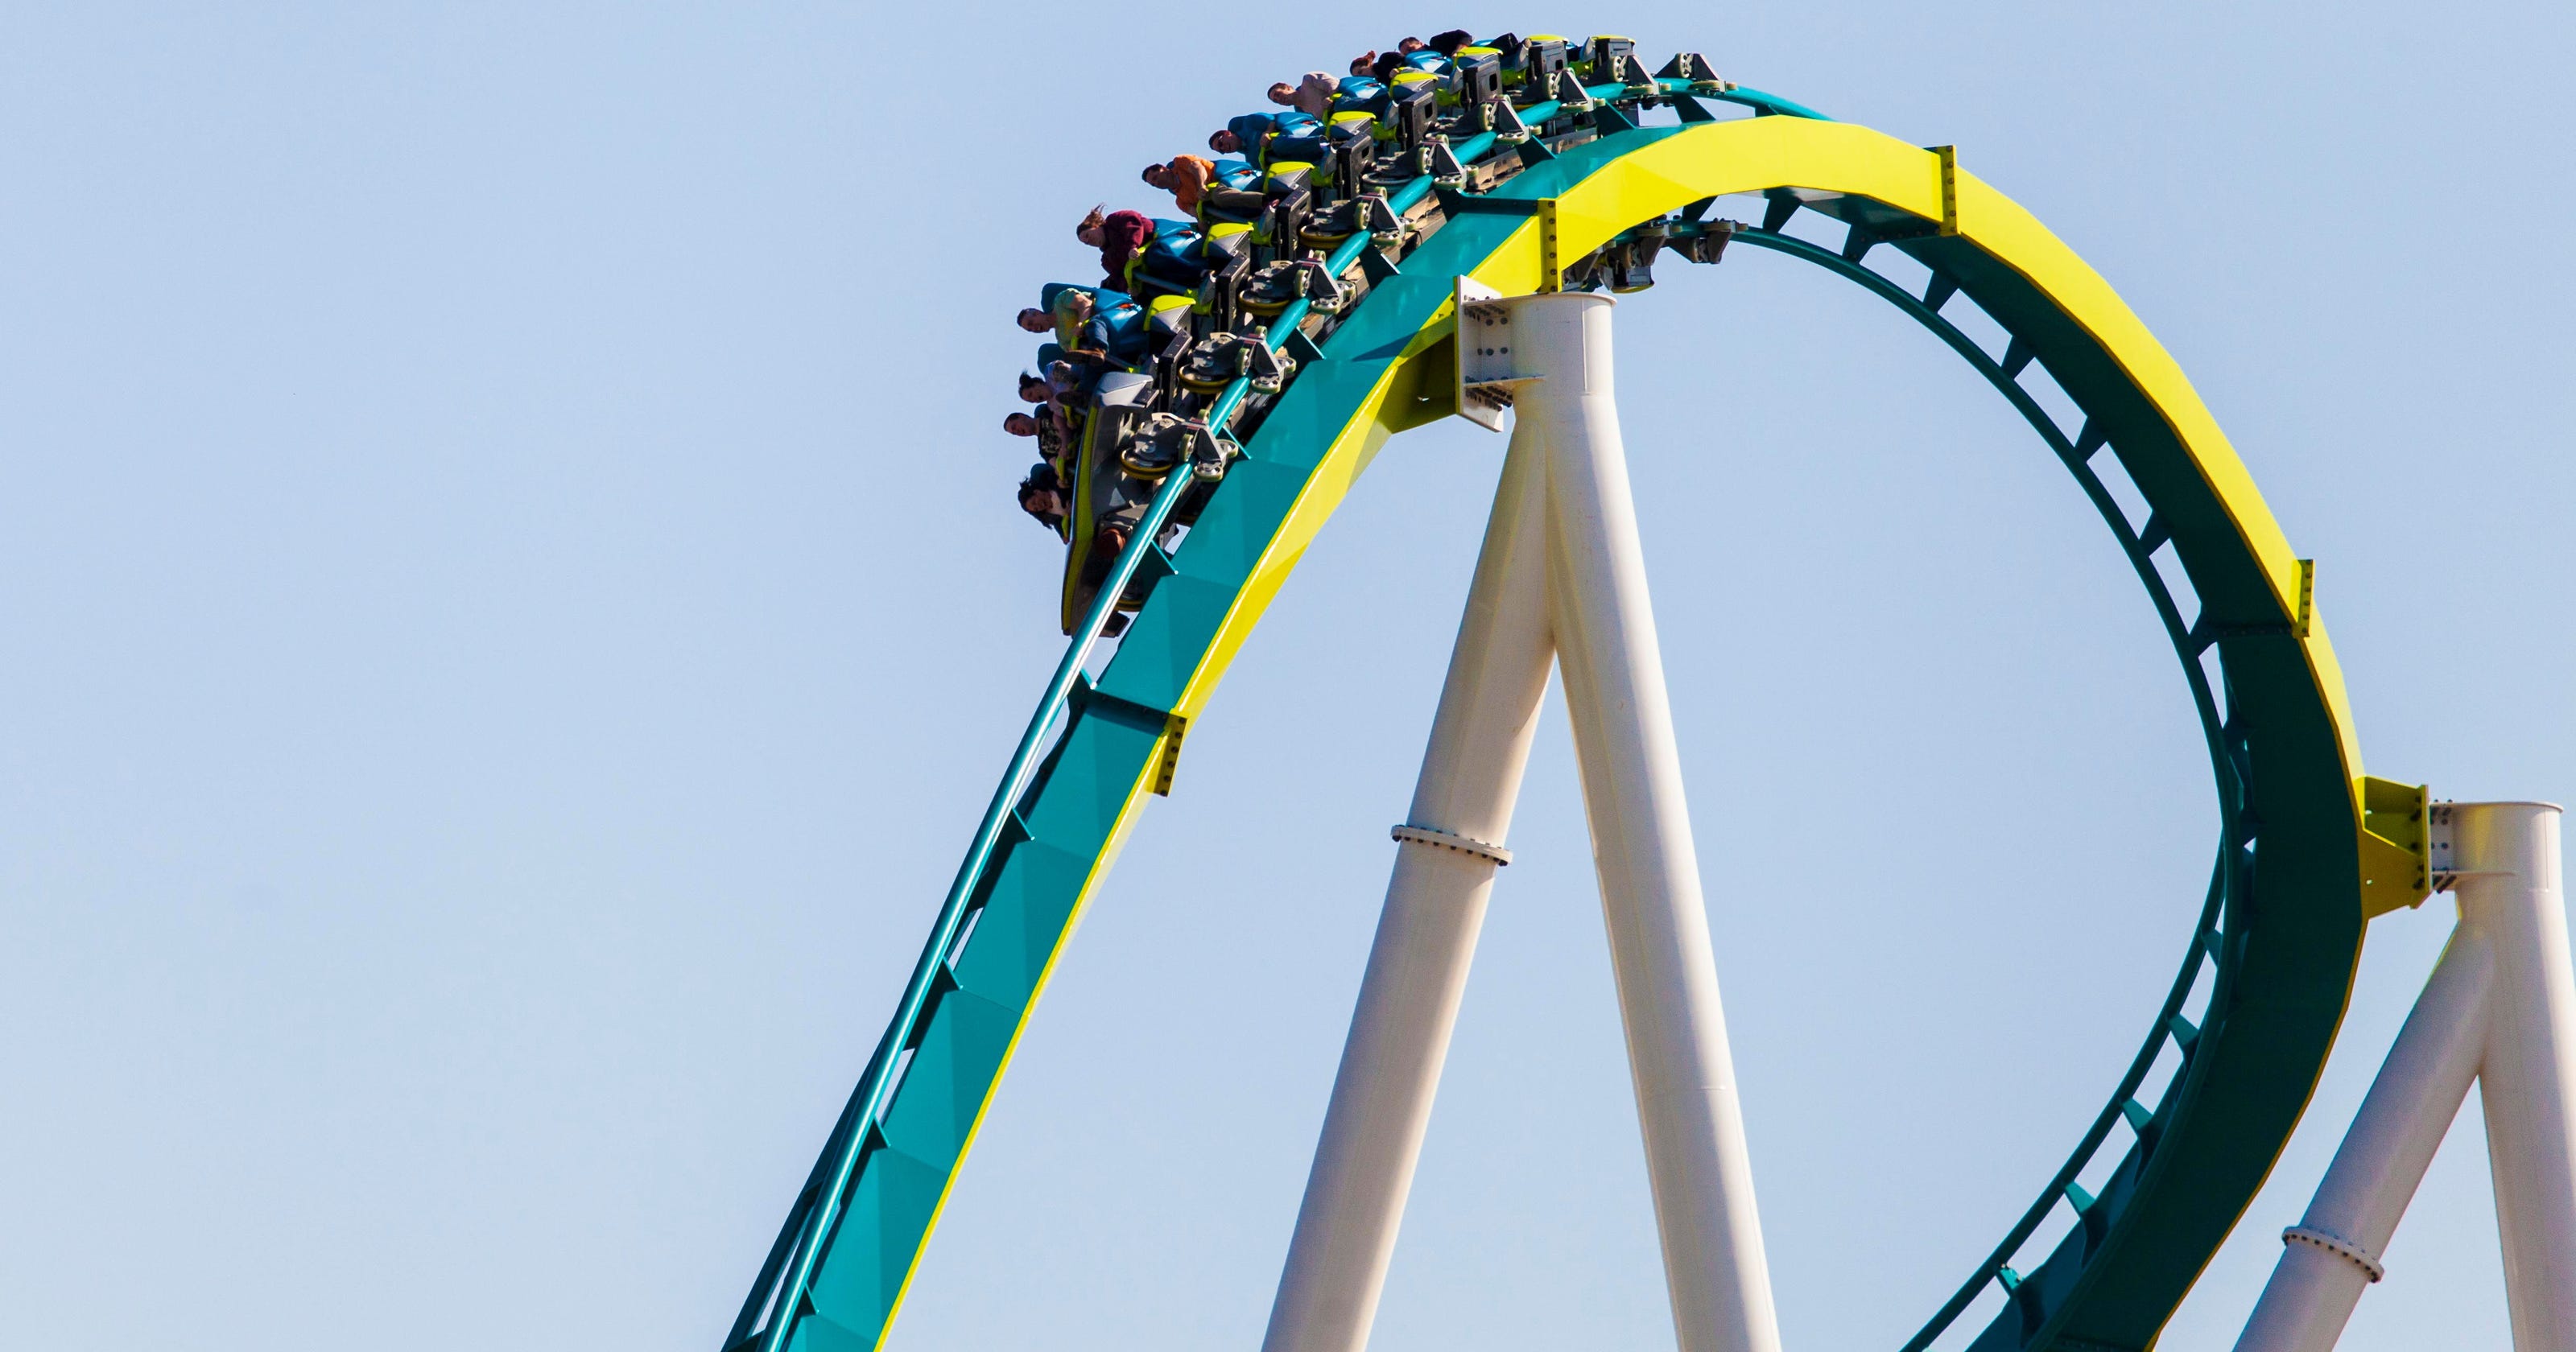 Listed: The best states for roller coasters